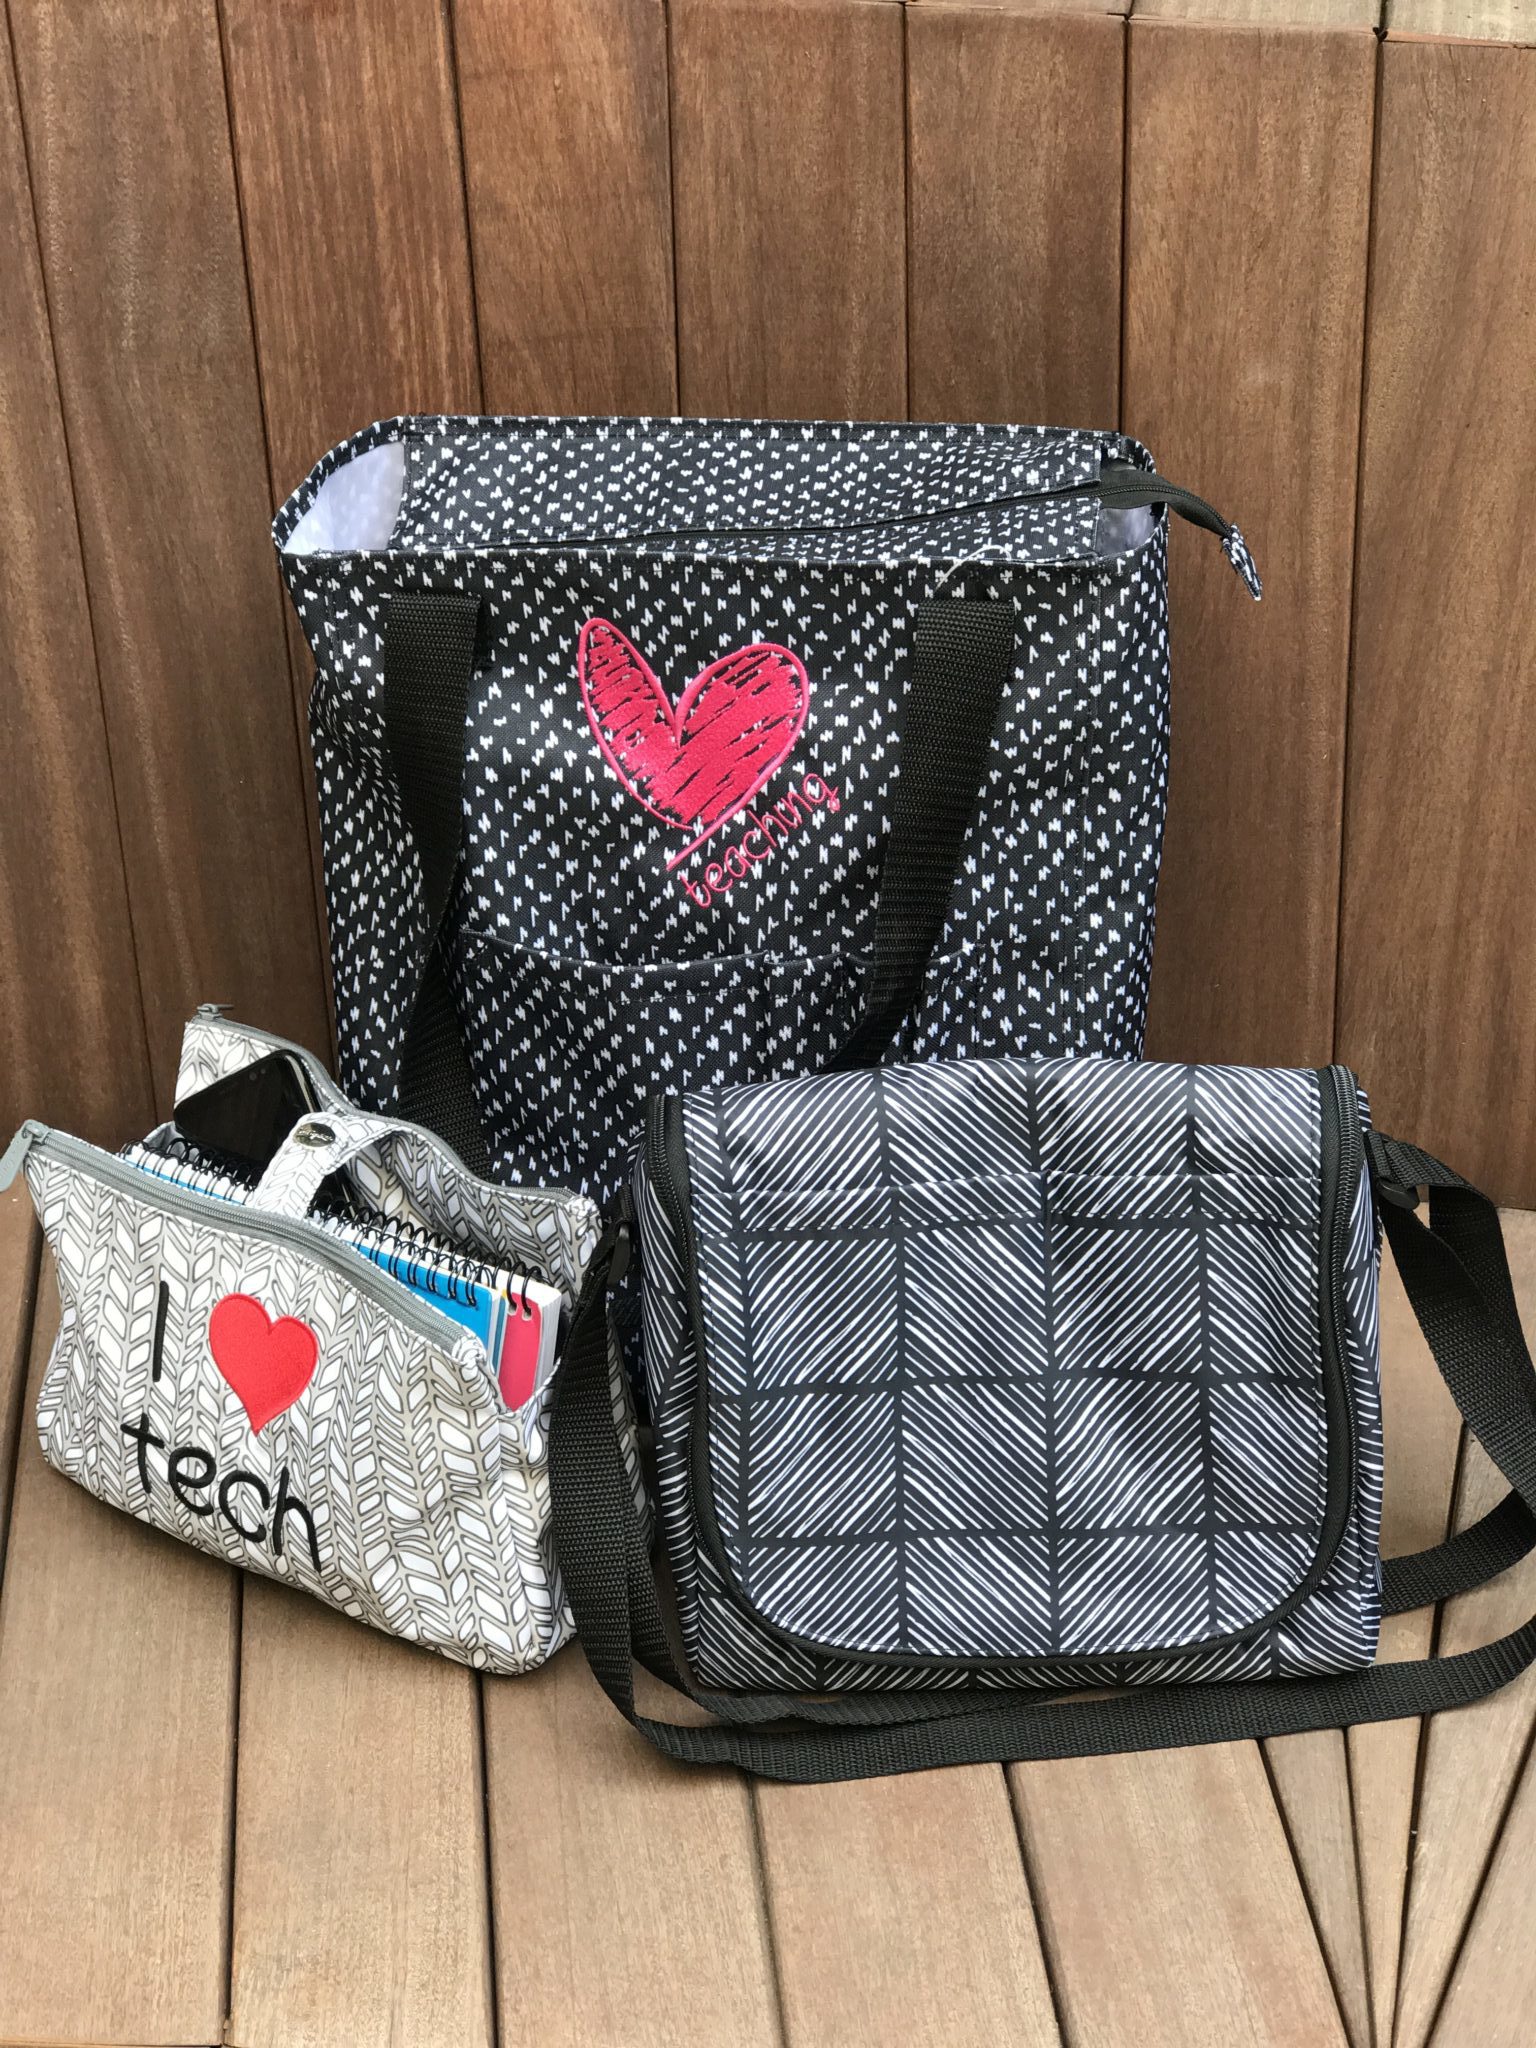 It's back to school time! This year we're ready with Thirty-One. Check out the great backpacks, totes, and lunch boxes we chose -- for kids and teachers too!